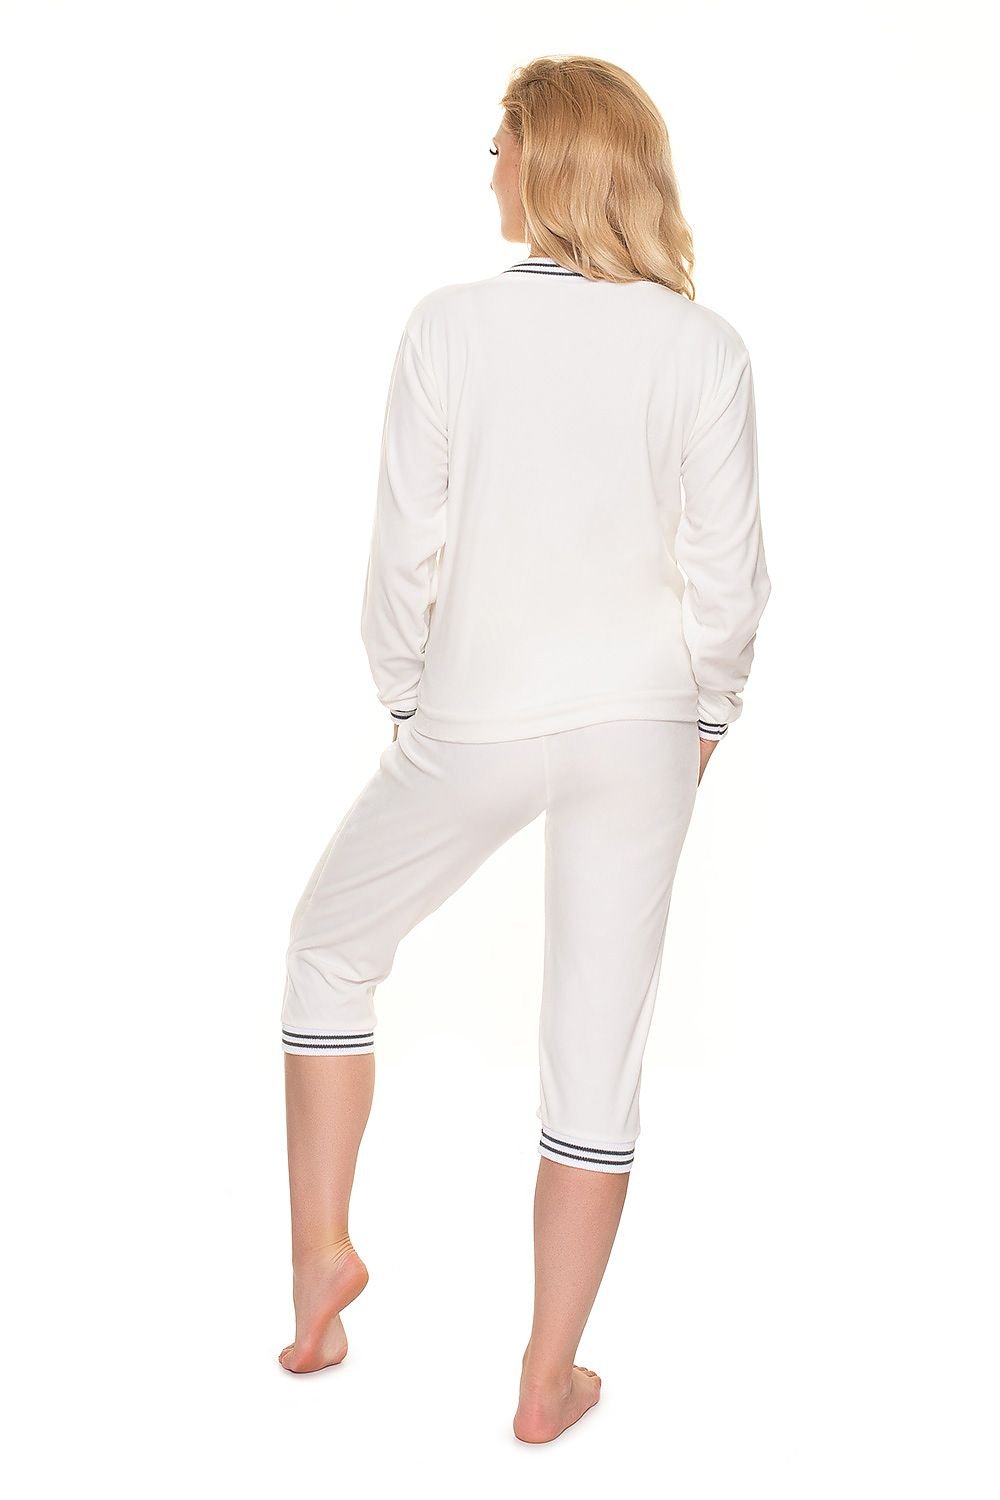 Tracksuit Set With Contrasting Piping PeeKaBoo